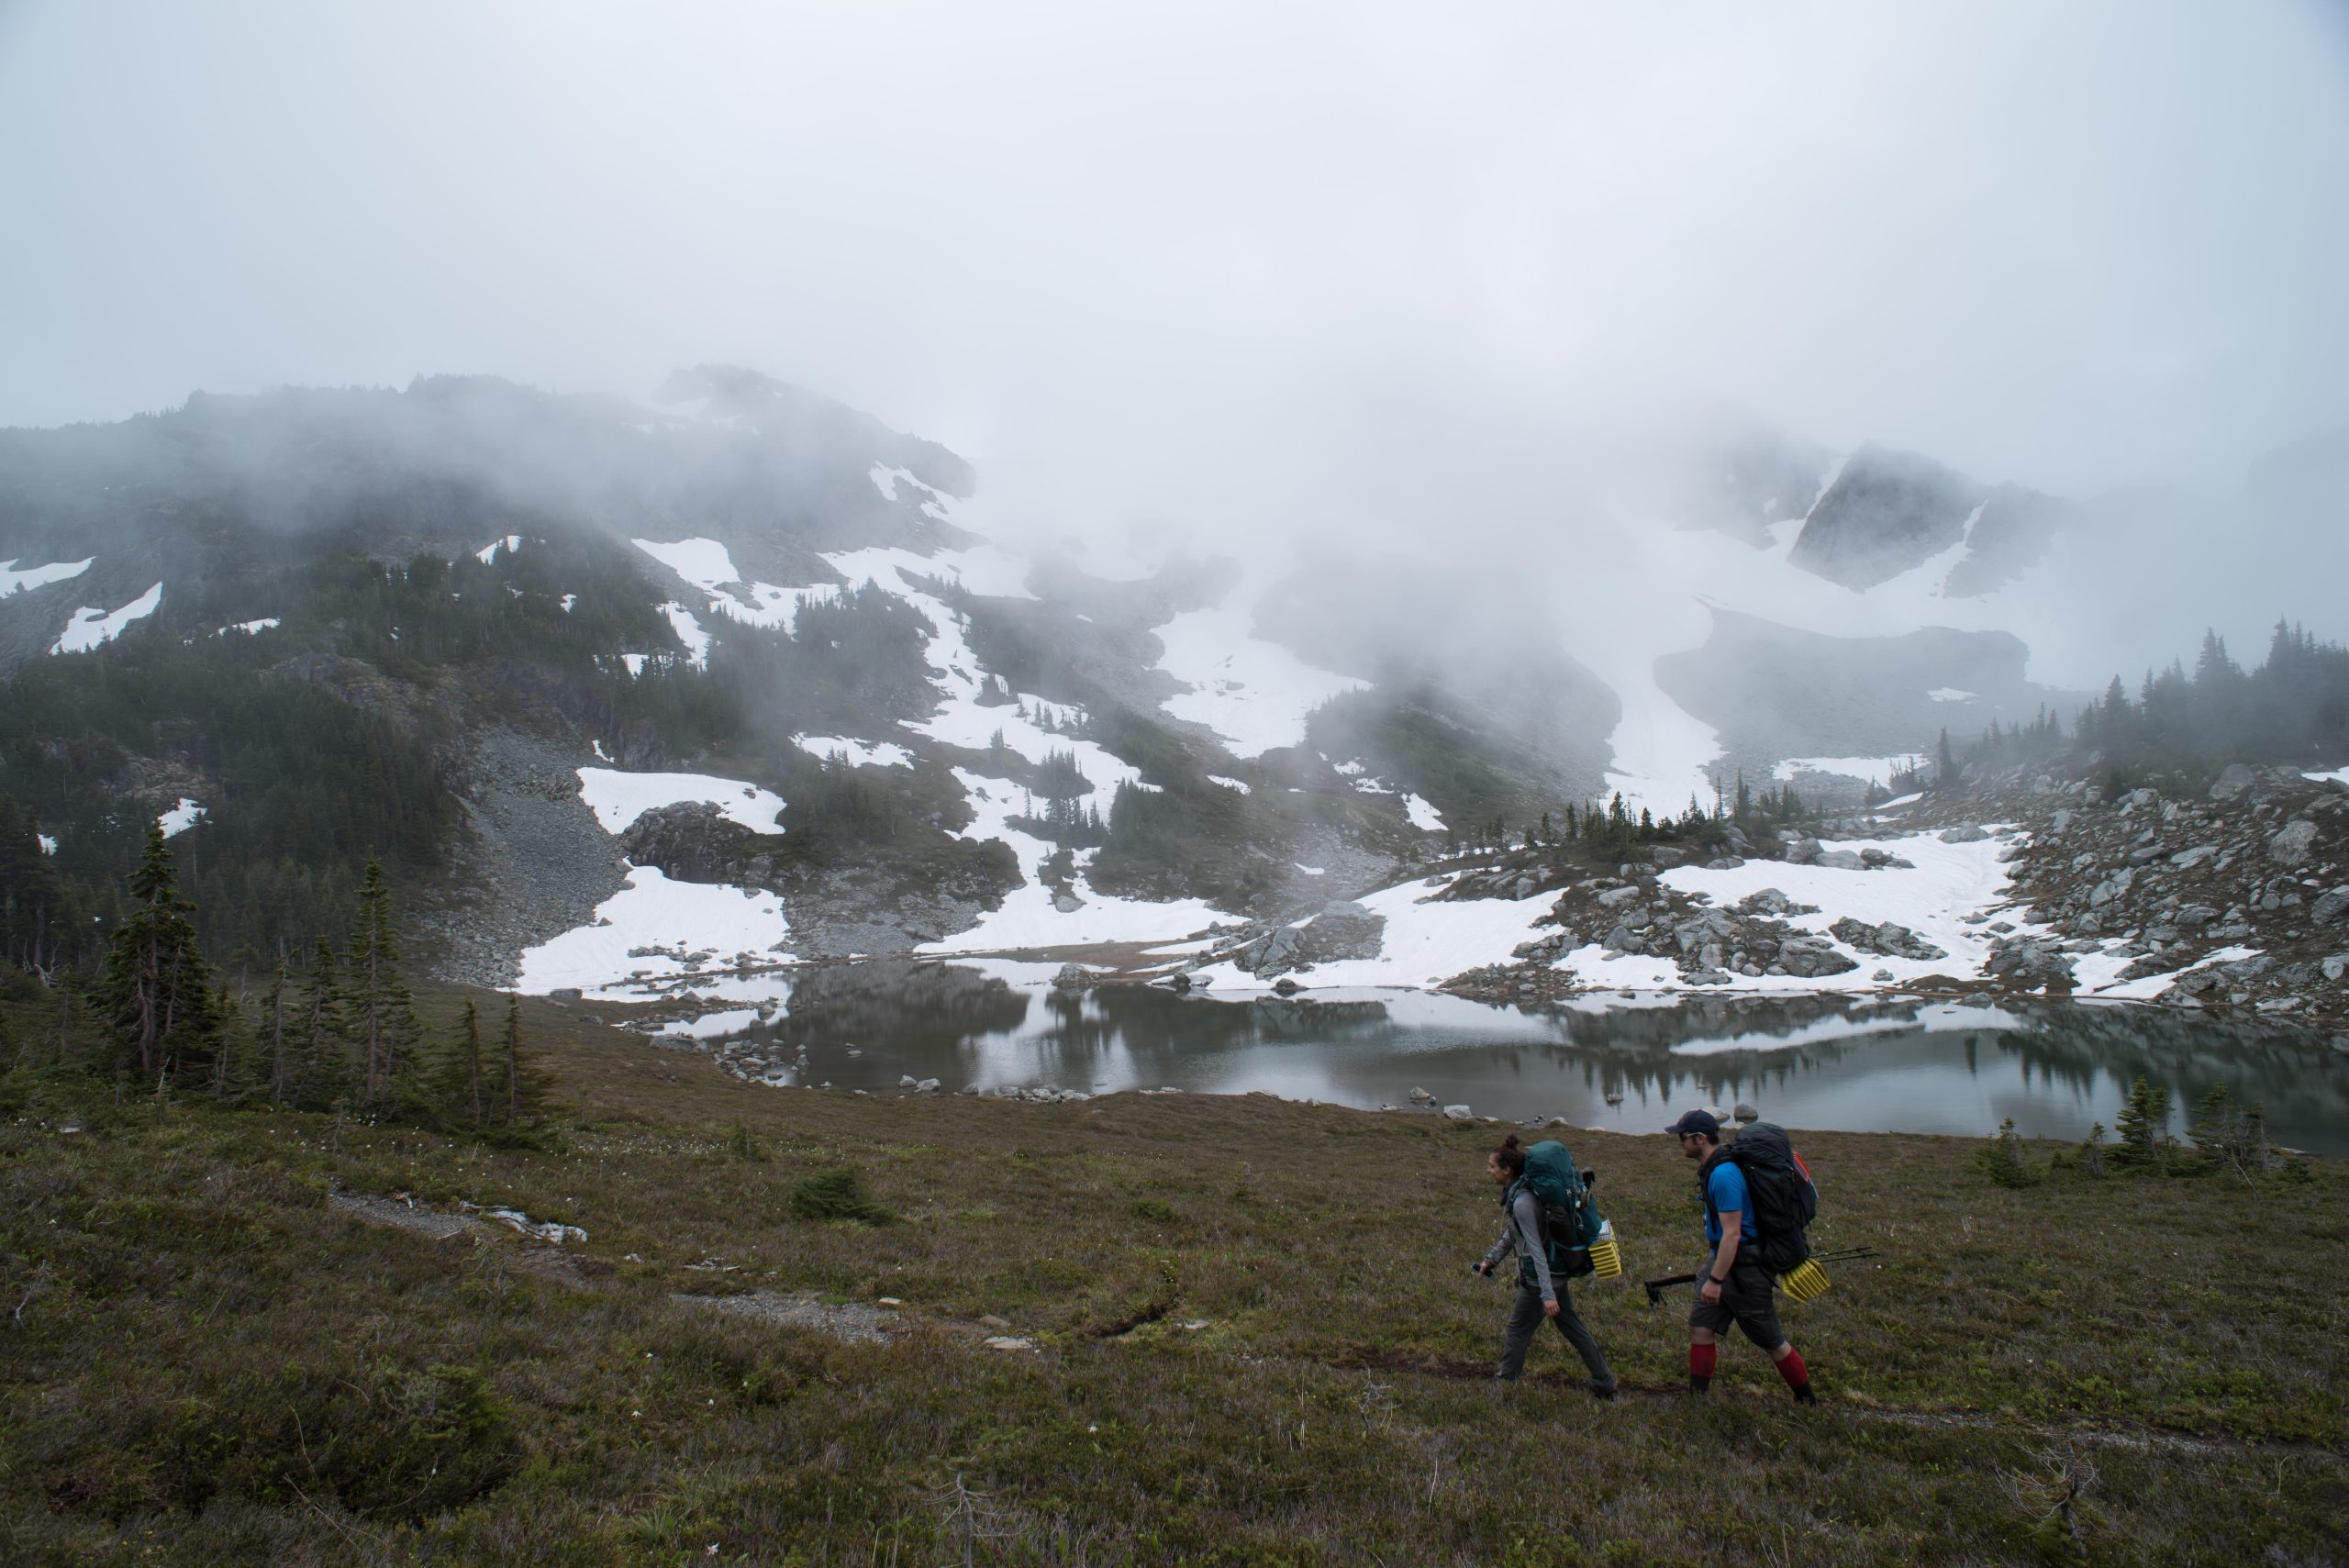 Two people backpacking through misty mountains, near a small lake. Patchy snow behind the hikers.